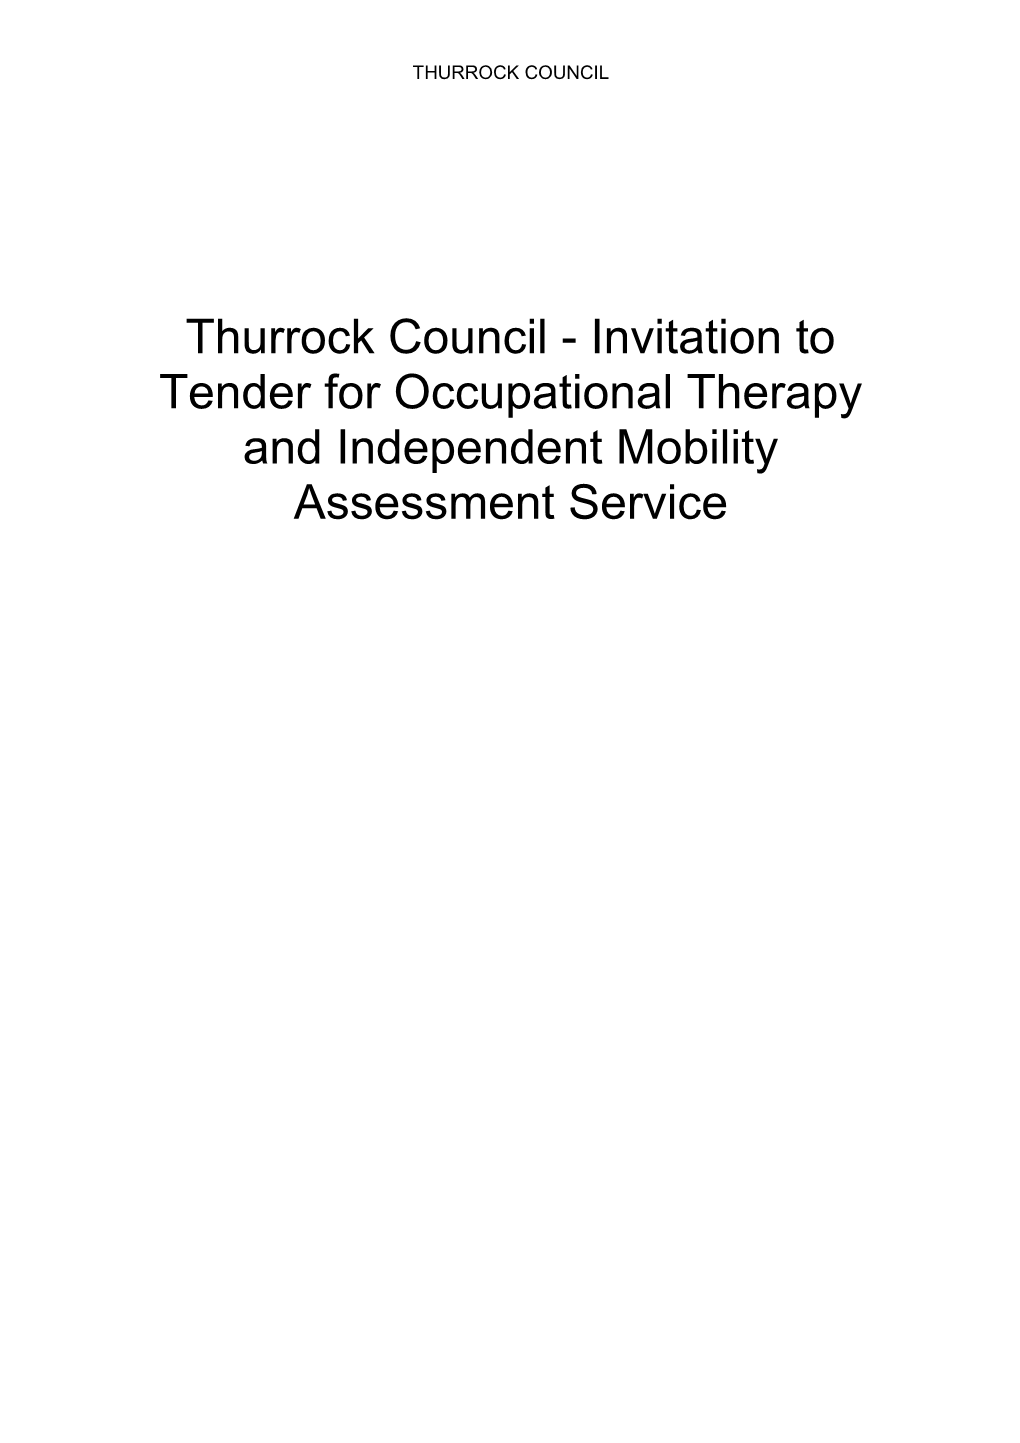 Thurrock Council - Invitation to Tender s3